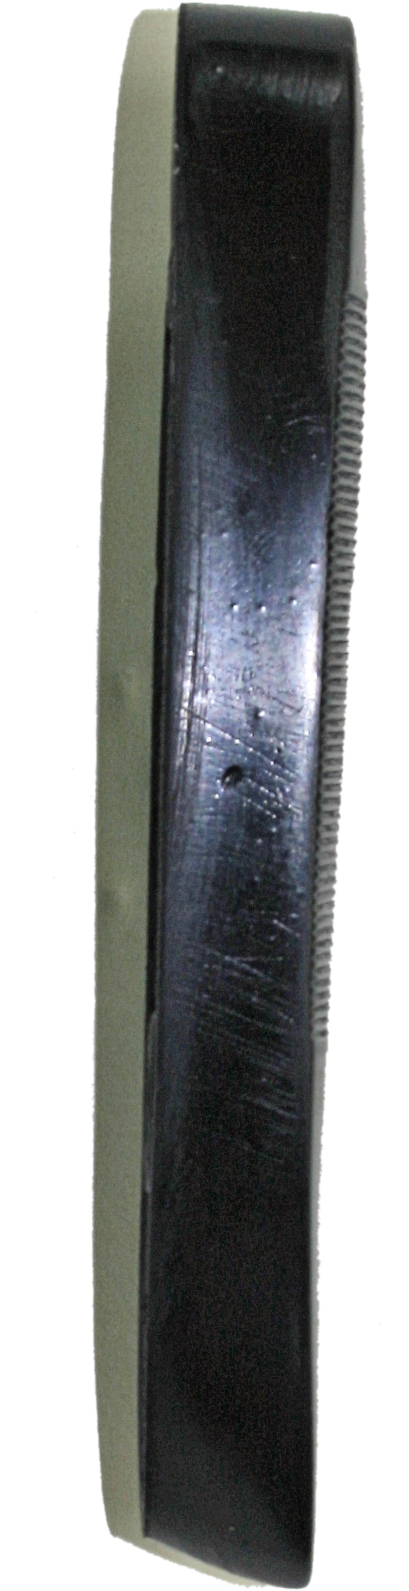 Buttplate L.C. Smith 12 Gauge